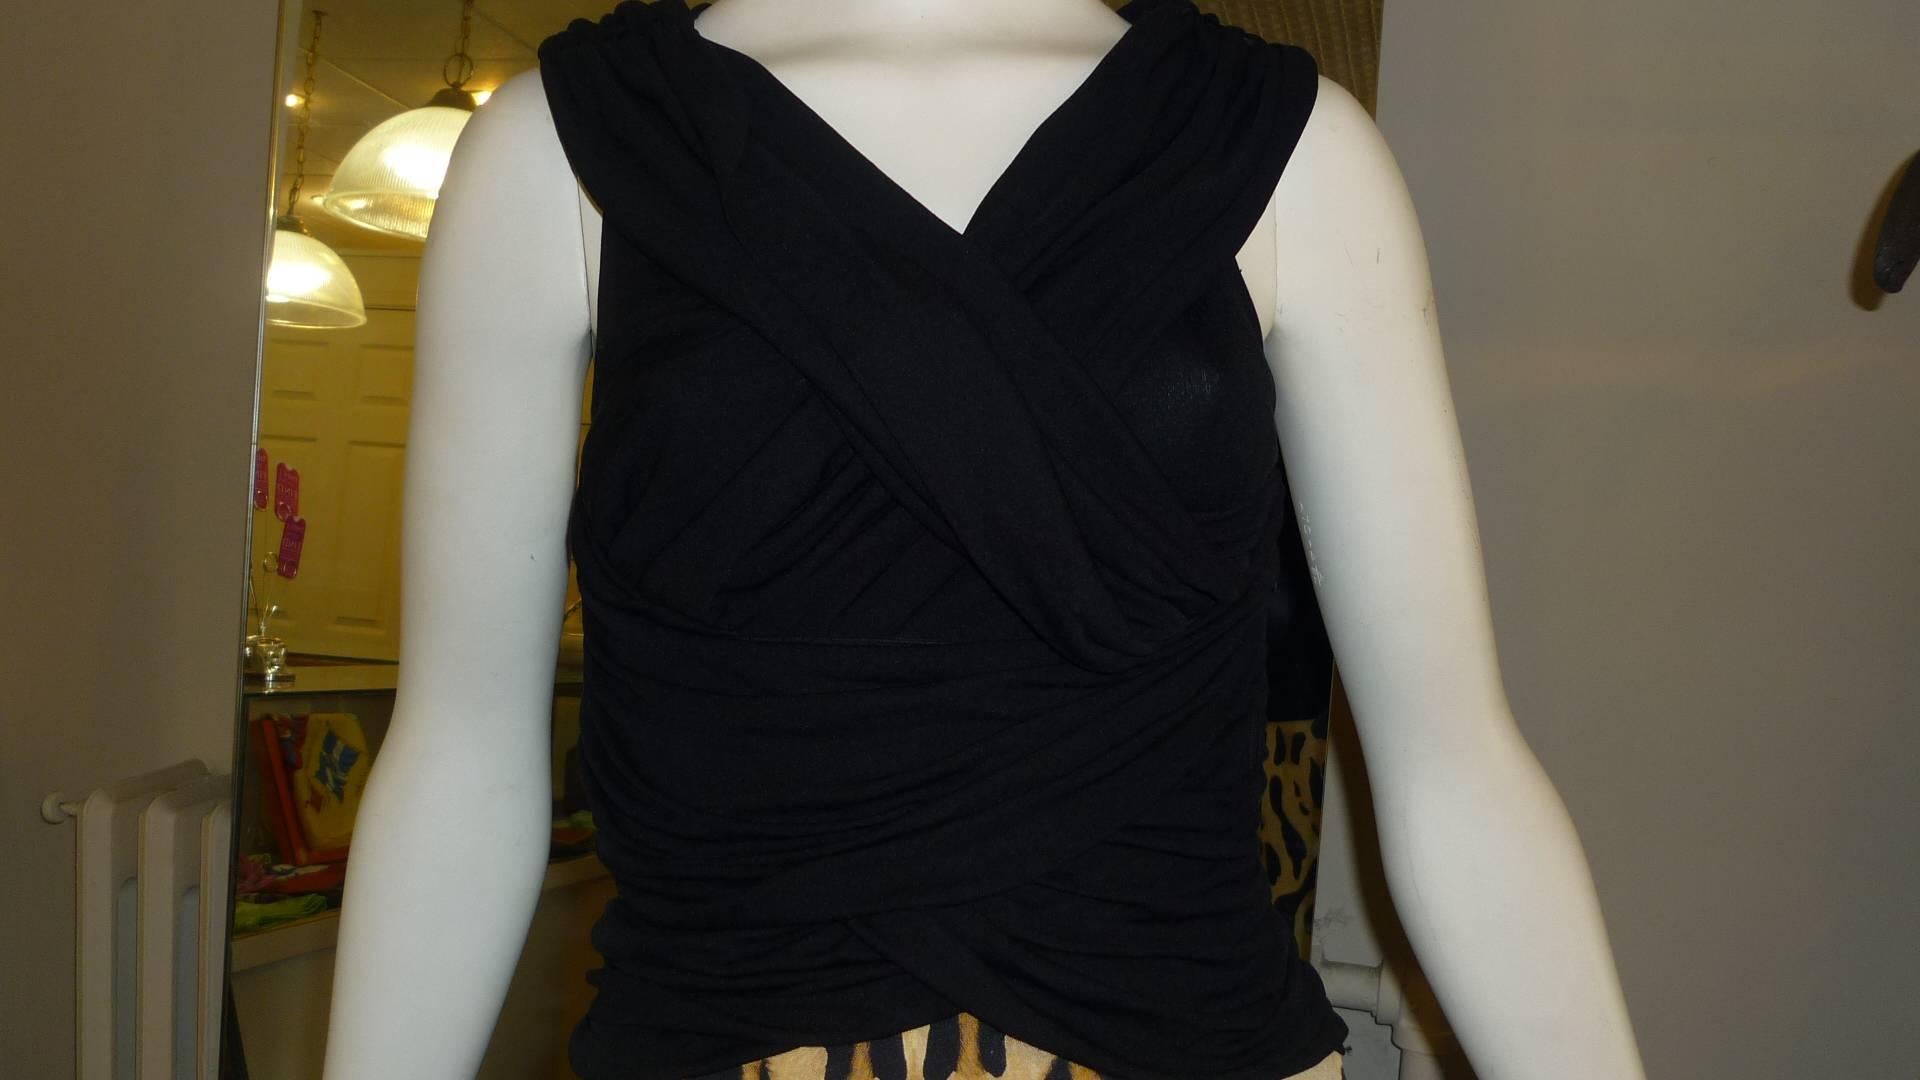 This two-tone dress has a black top made of silk and polyamid with elasthane with a lot of draping, giving the effect of a cowl neckline and gathered bust and waist. The wide gathered straps are adjustable.

The bottom is made of raw silk with a